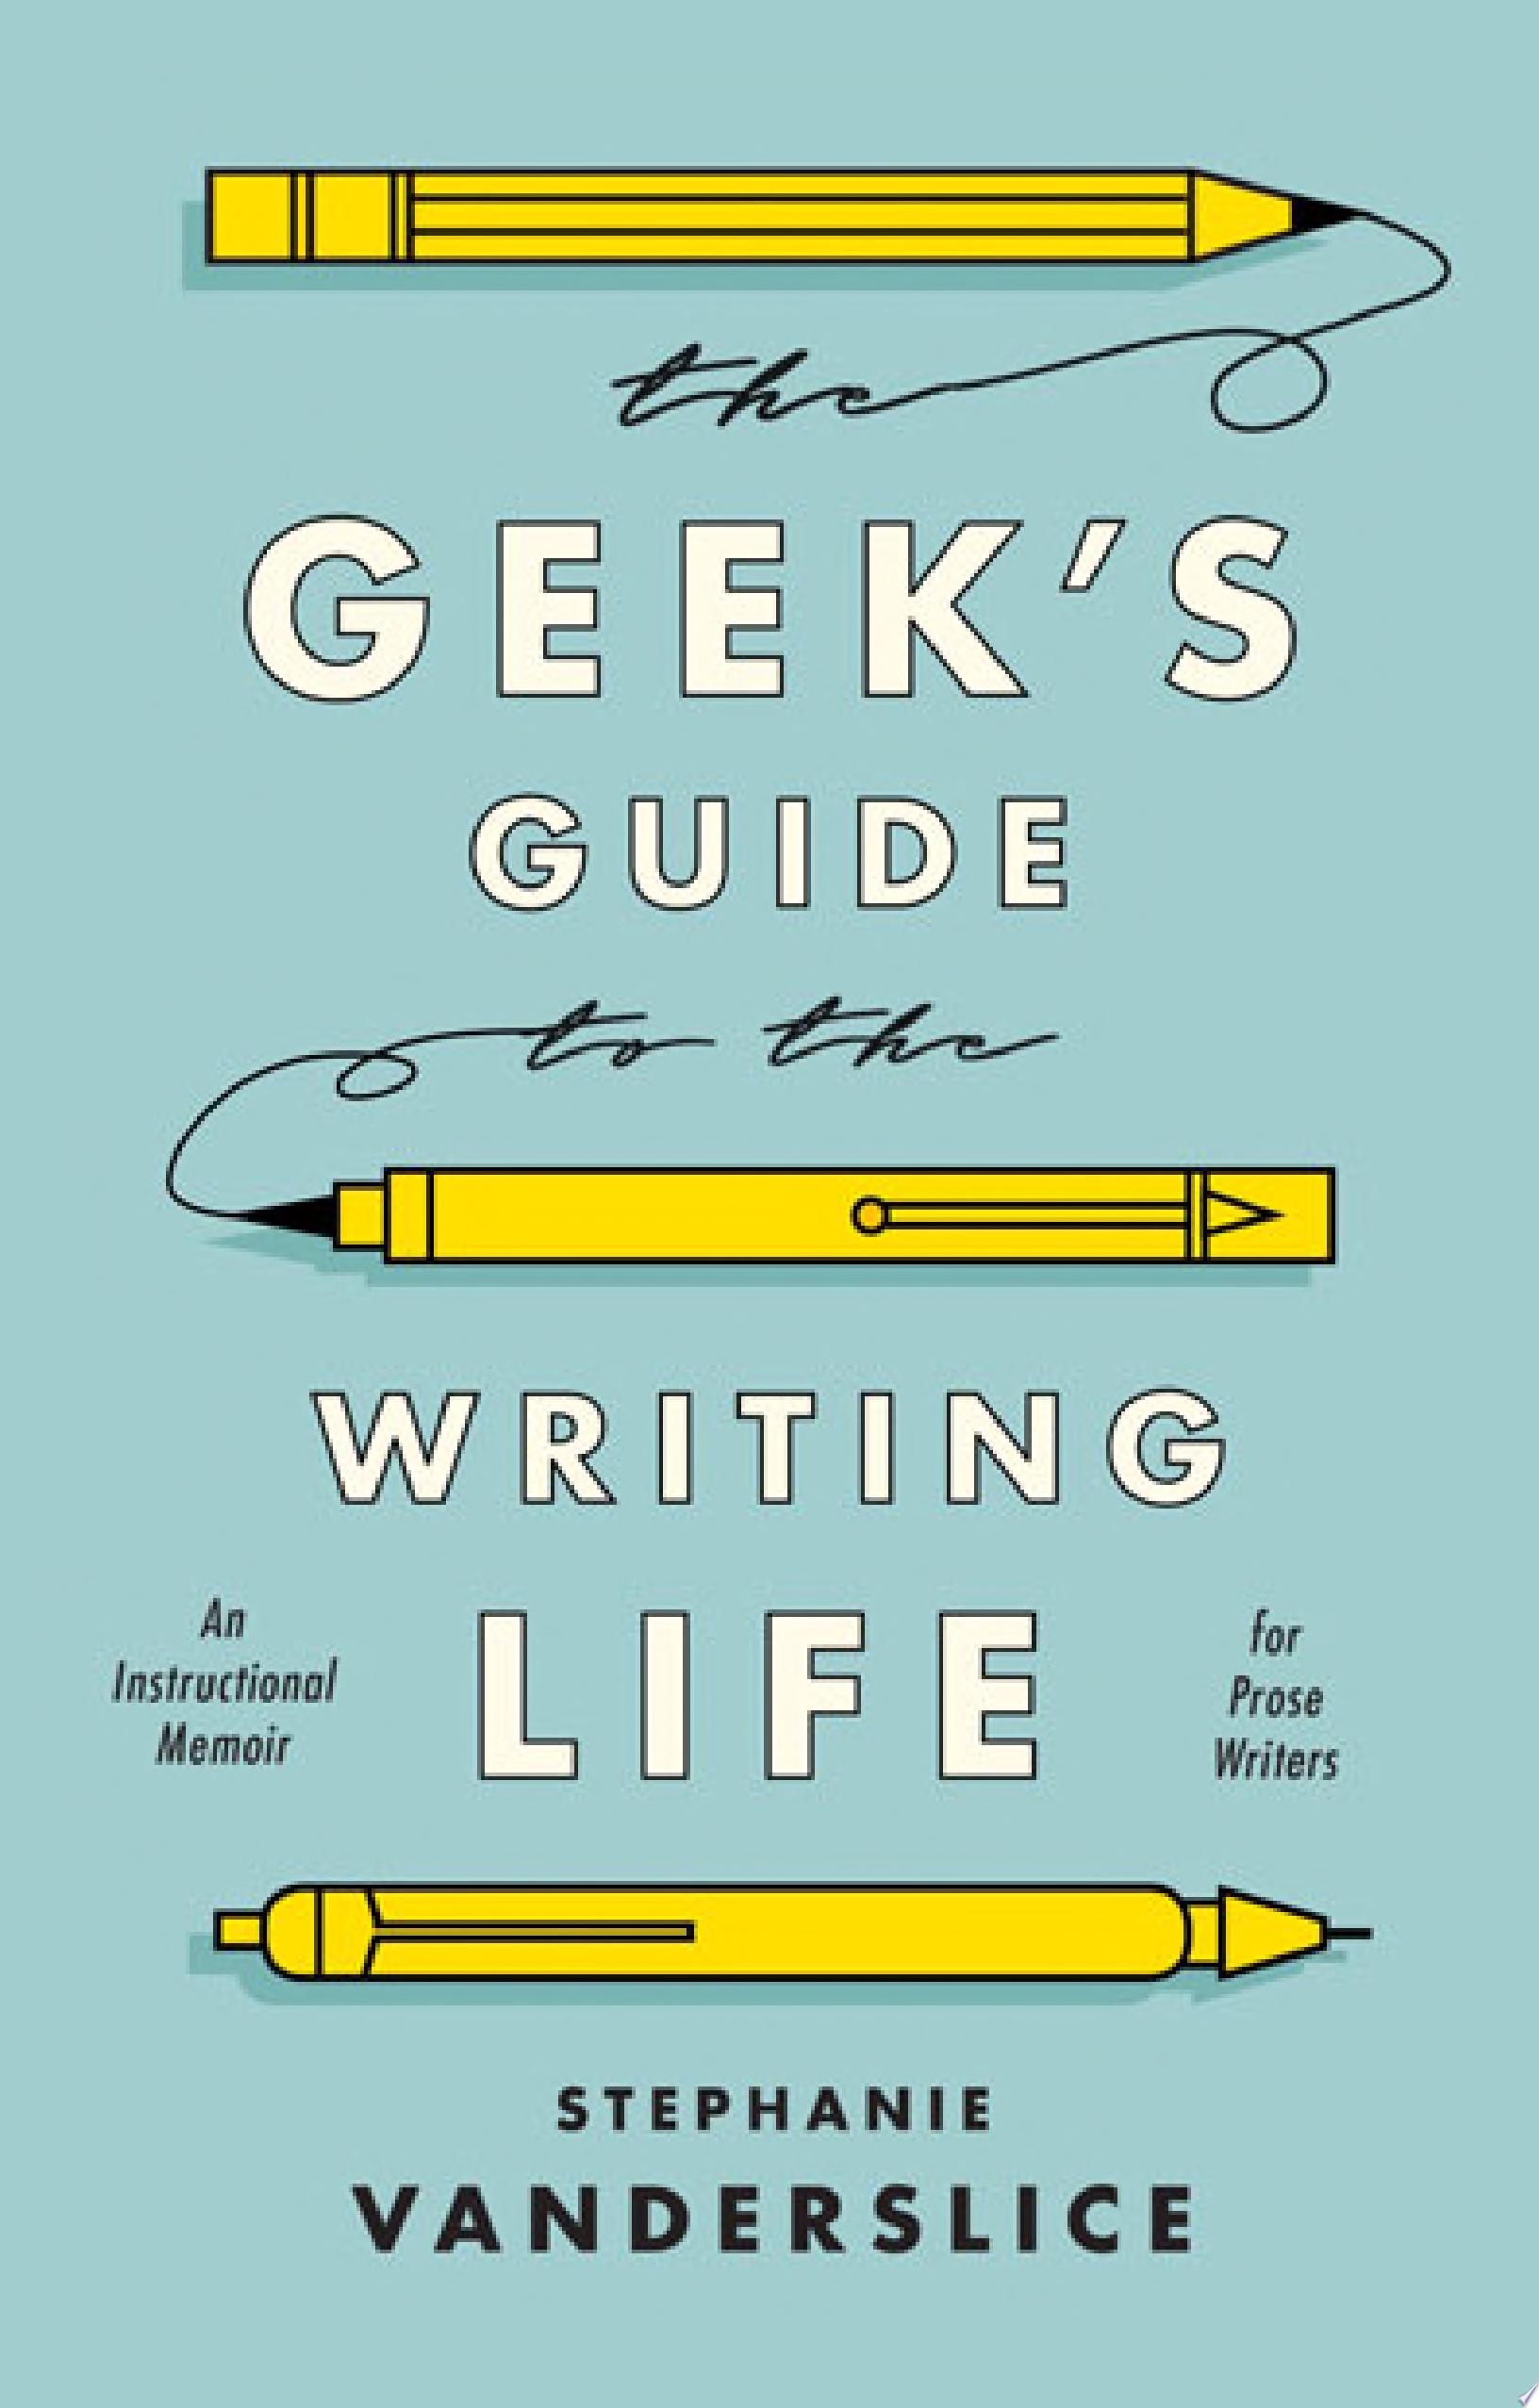 Image for "The Geek’s Guide to the Writing Life"